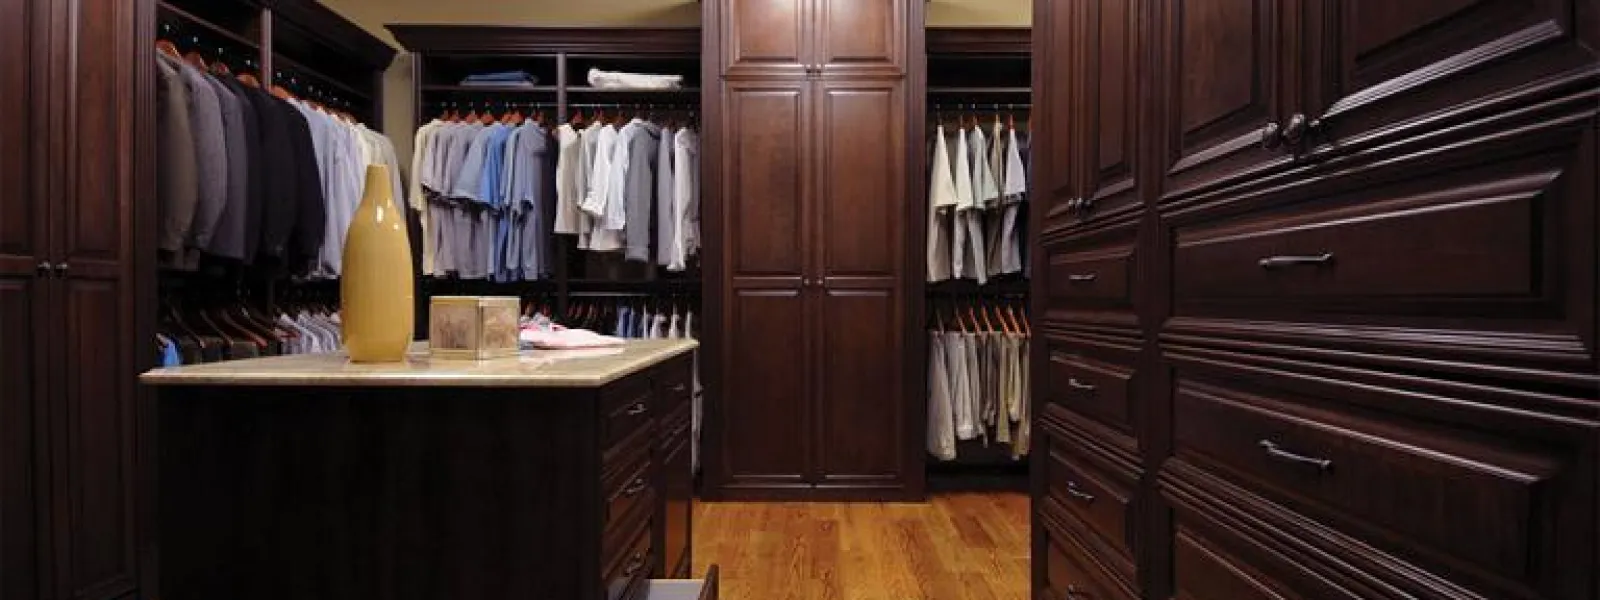 Getting Organized for 2012: The Closet